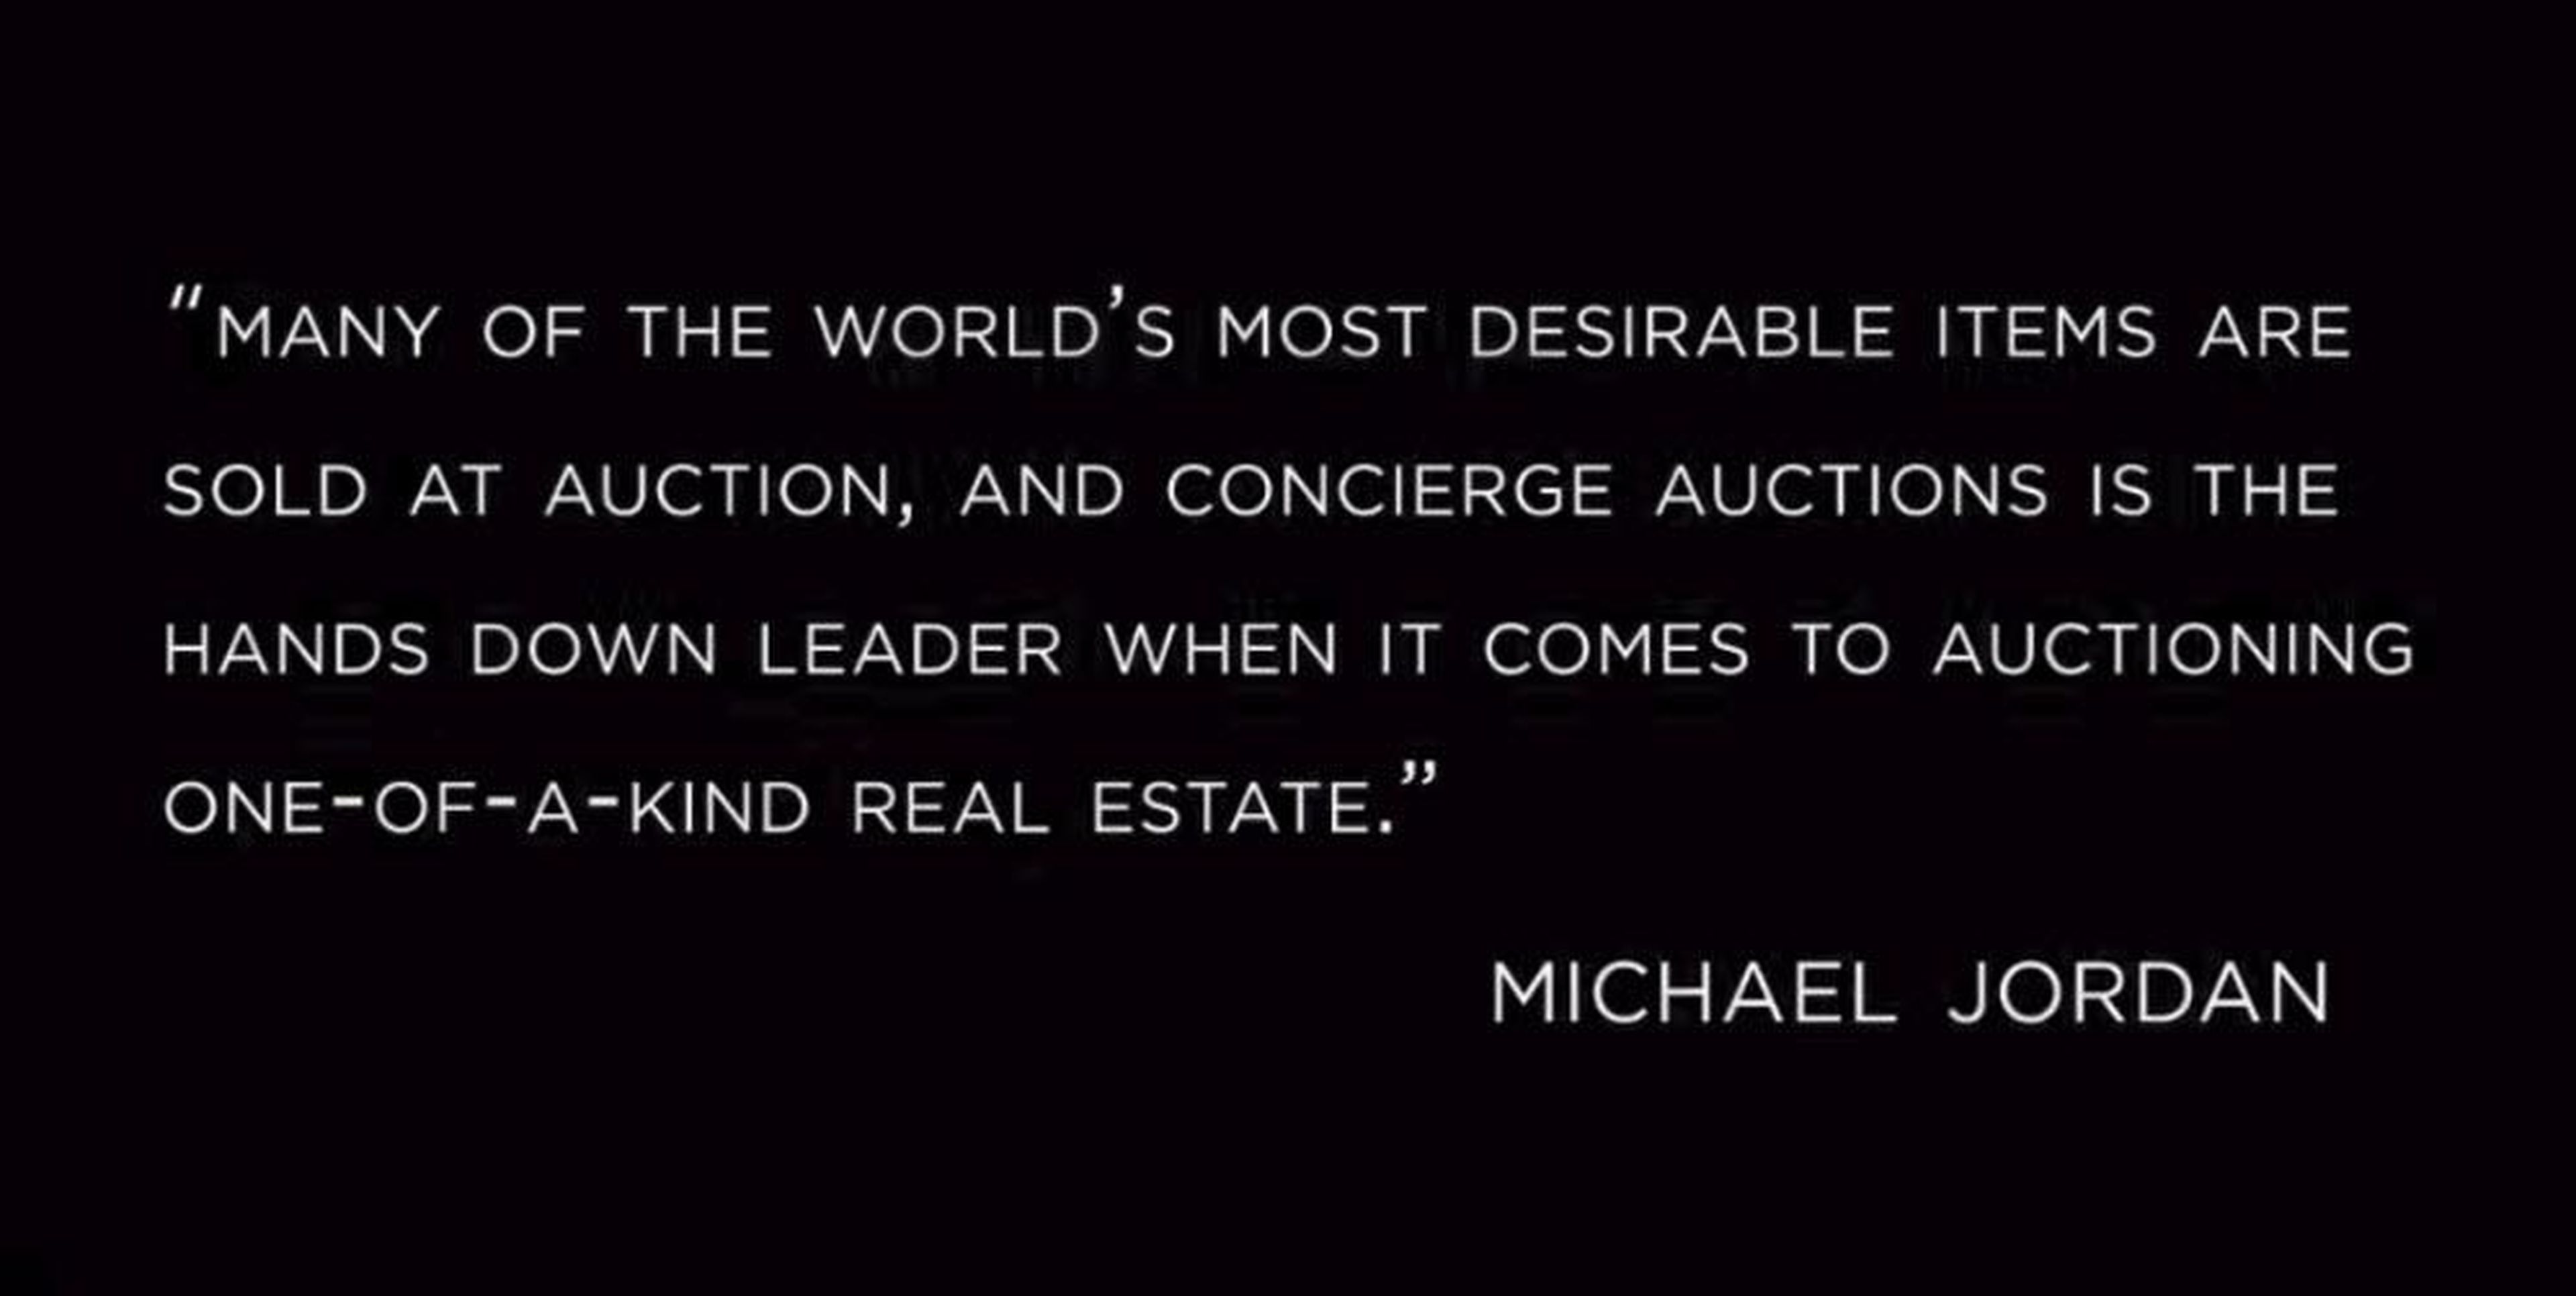 Jordan said, "Many of the world's most desirable items are sold at auction, and Concierge Auctions is the hands-down leader when it comes to auctioning one-of-a-kind real estate."